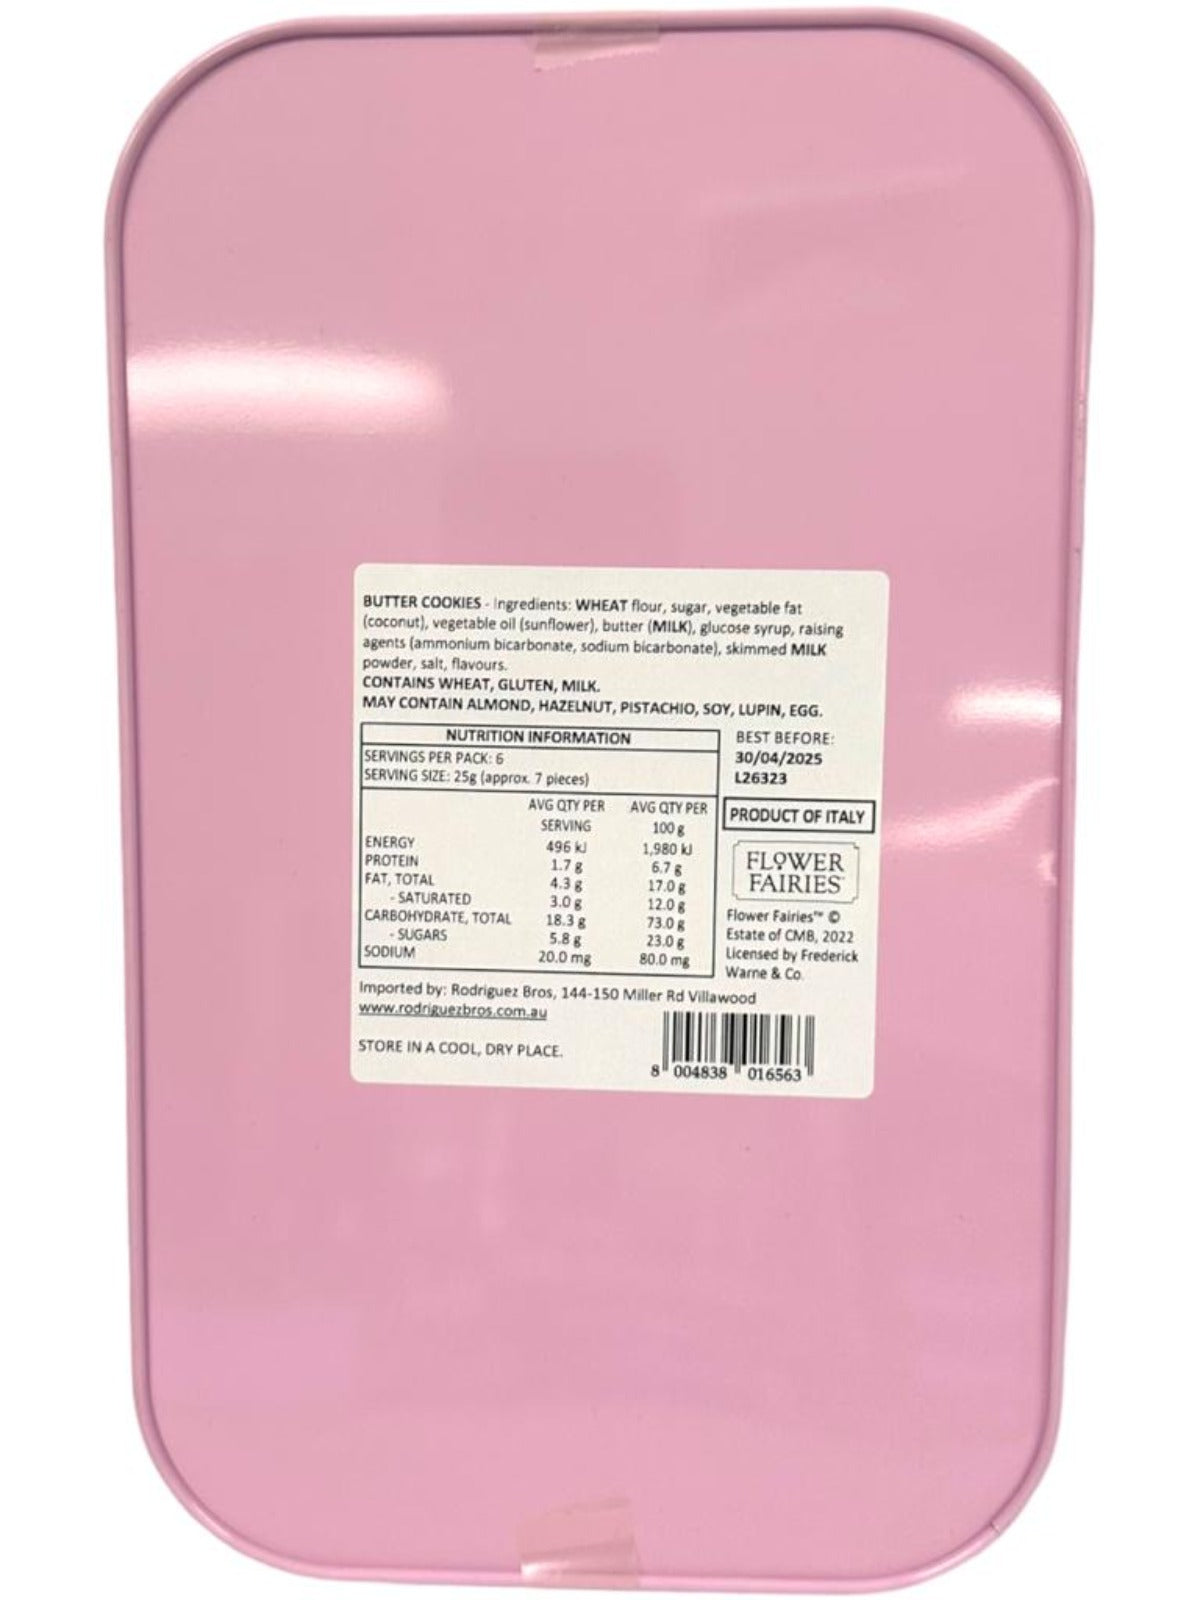 Marie Ange di Costa Flower Fairy Italian Butter Cookies—Il Bellezza in Pink  150g